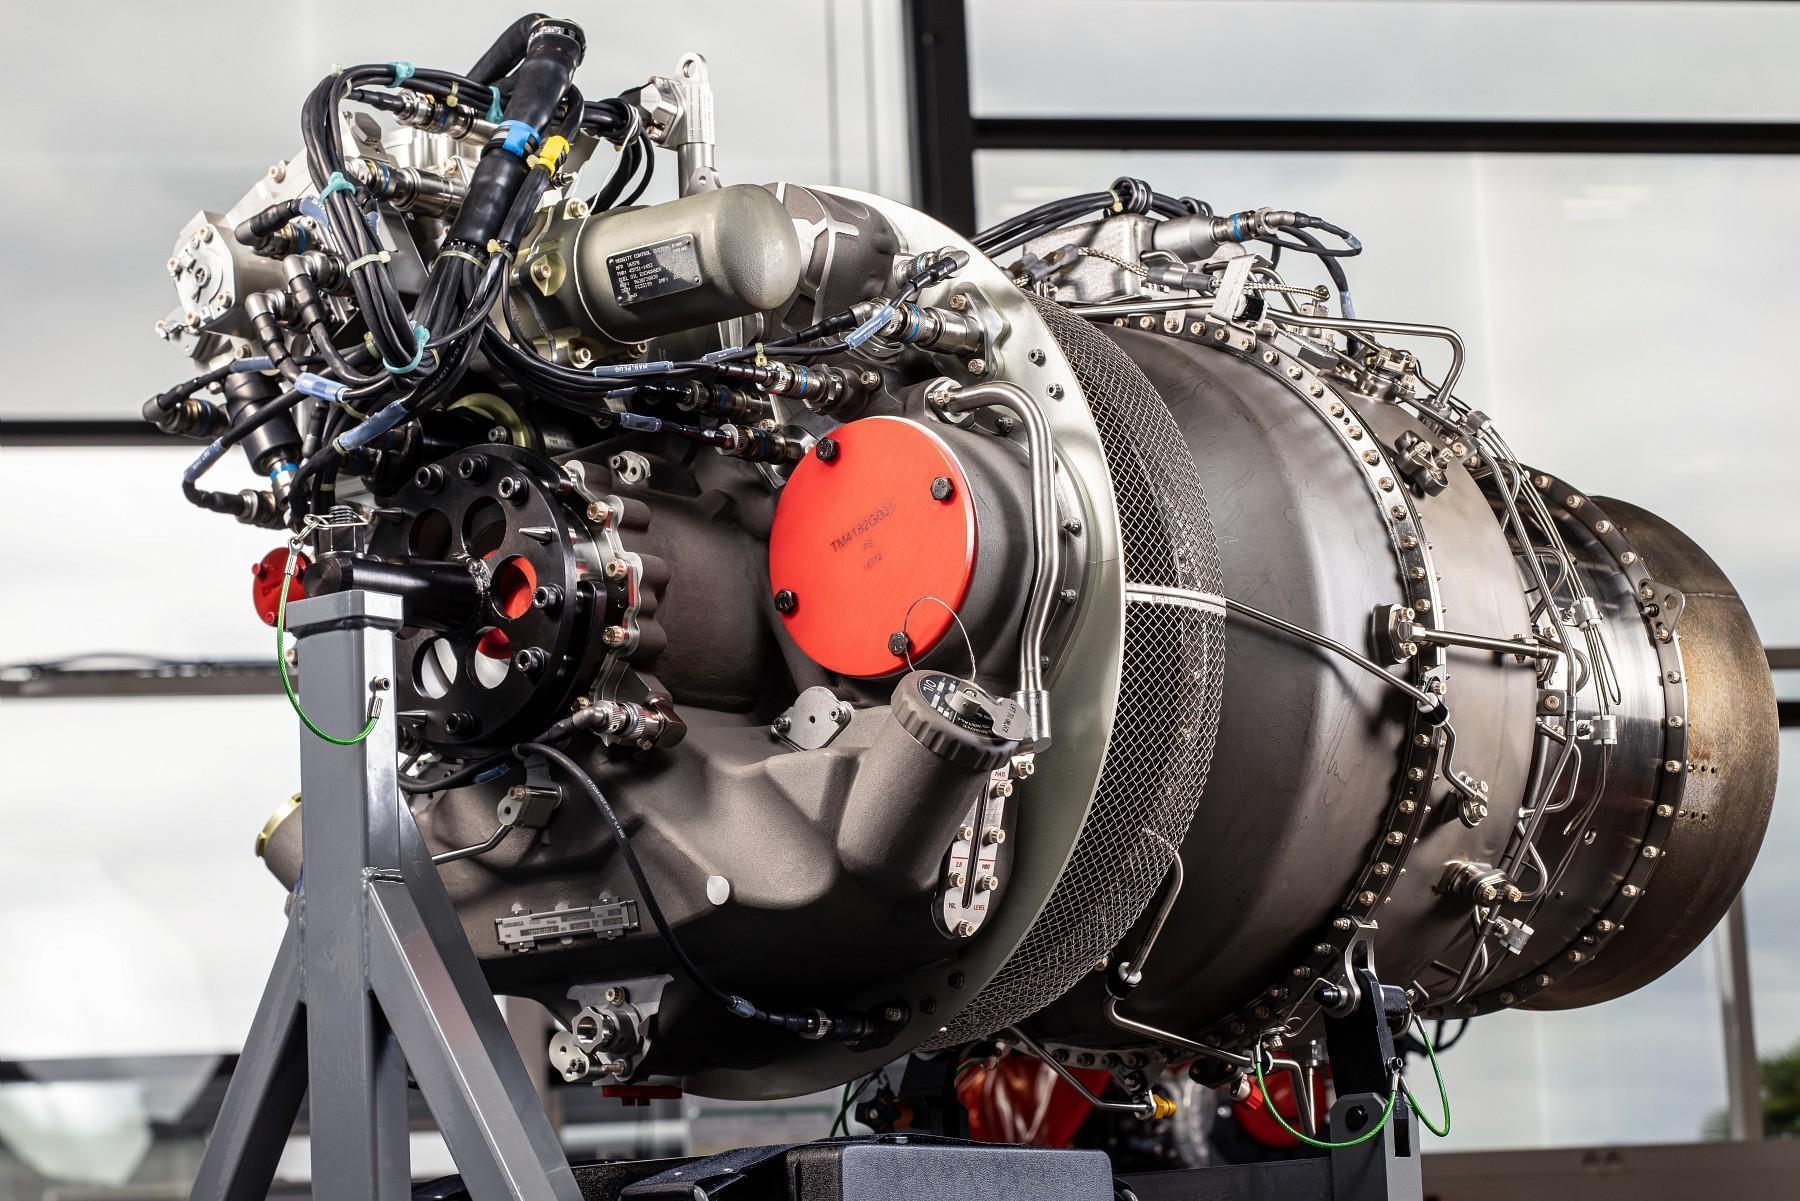 Piaggio Aerospace and France's Safran Helicopter Engines have inked a Letter of Intent to cooperate on the production of Ardiden 3 engines